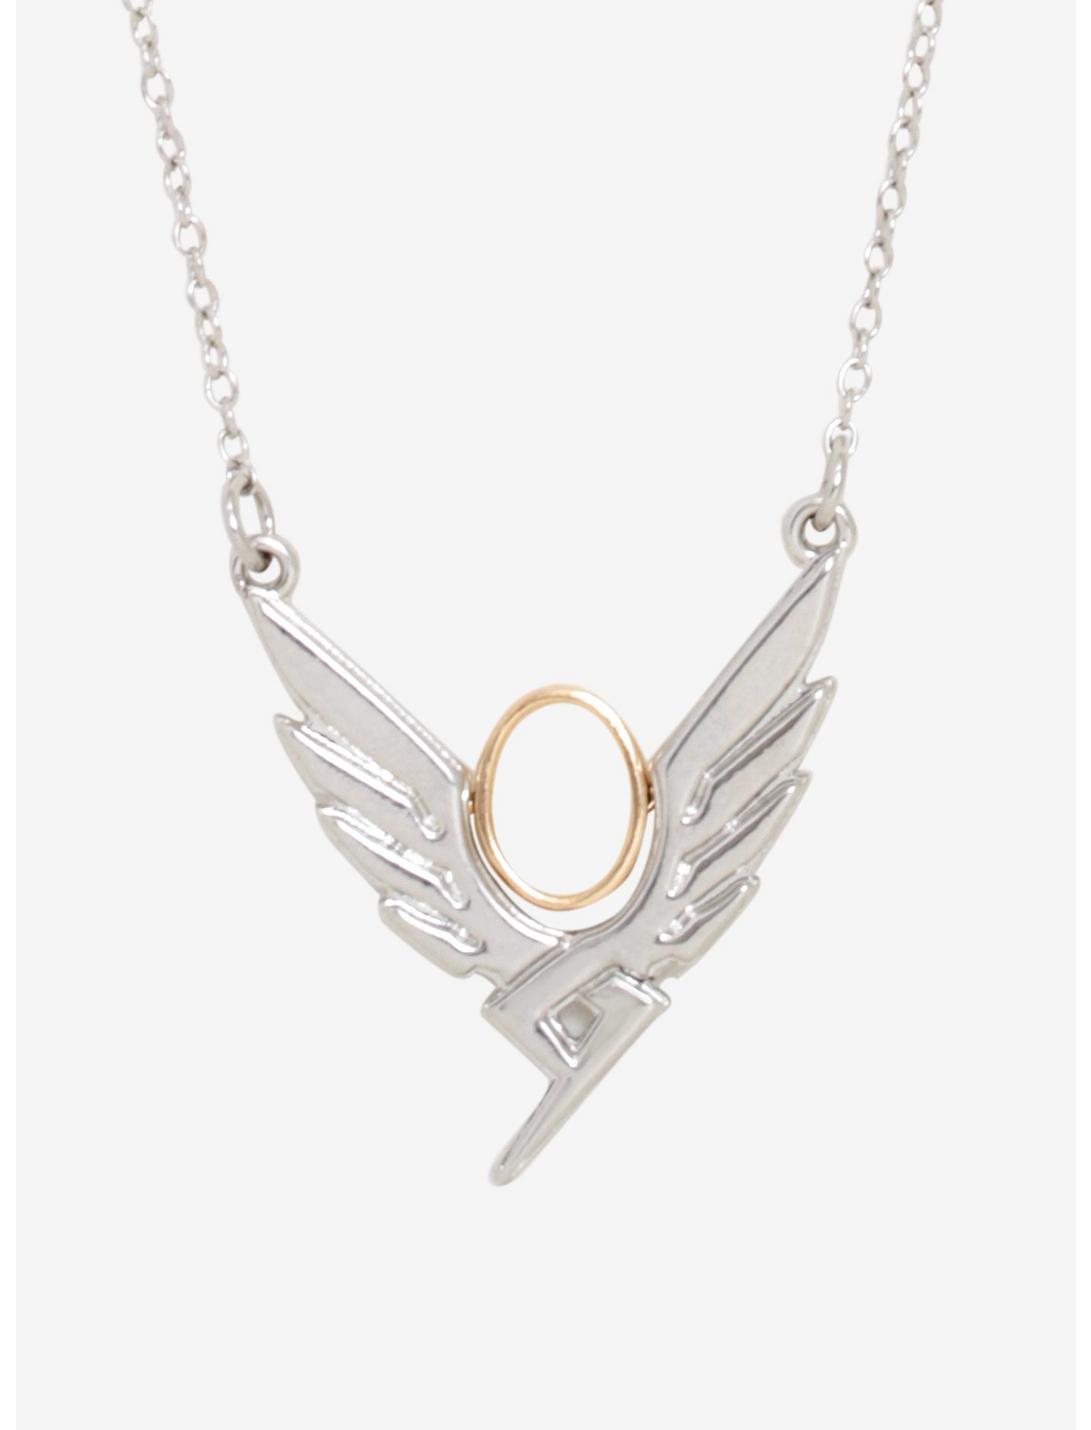 Her Universe Overwatch Mercy Wings Necklace, , hi-res